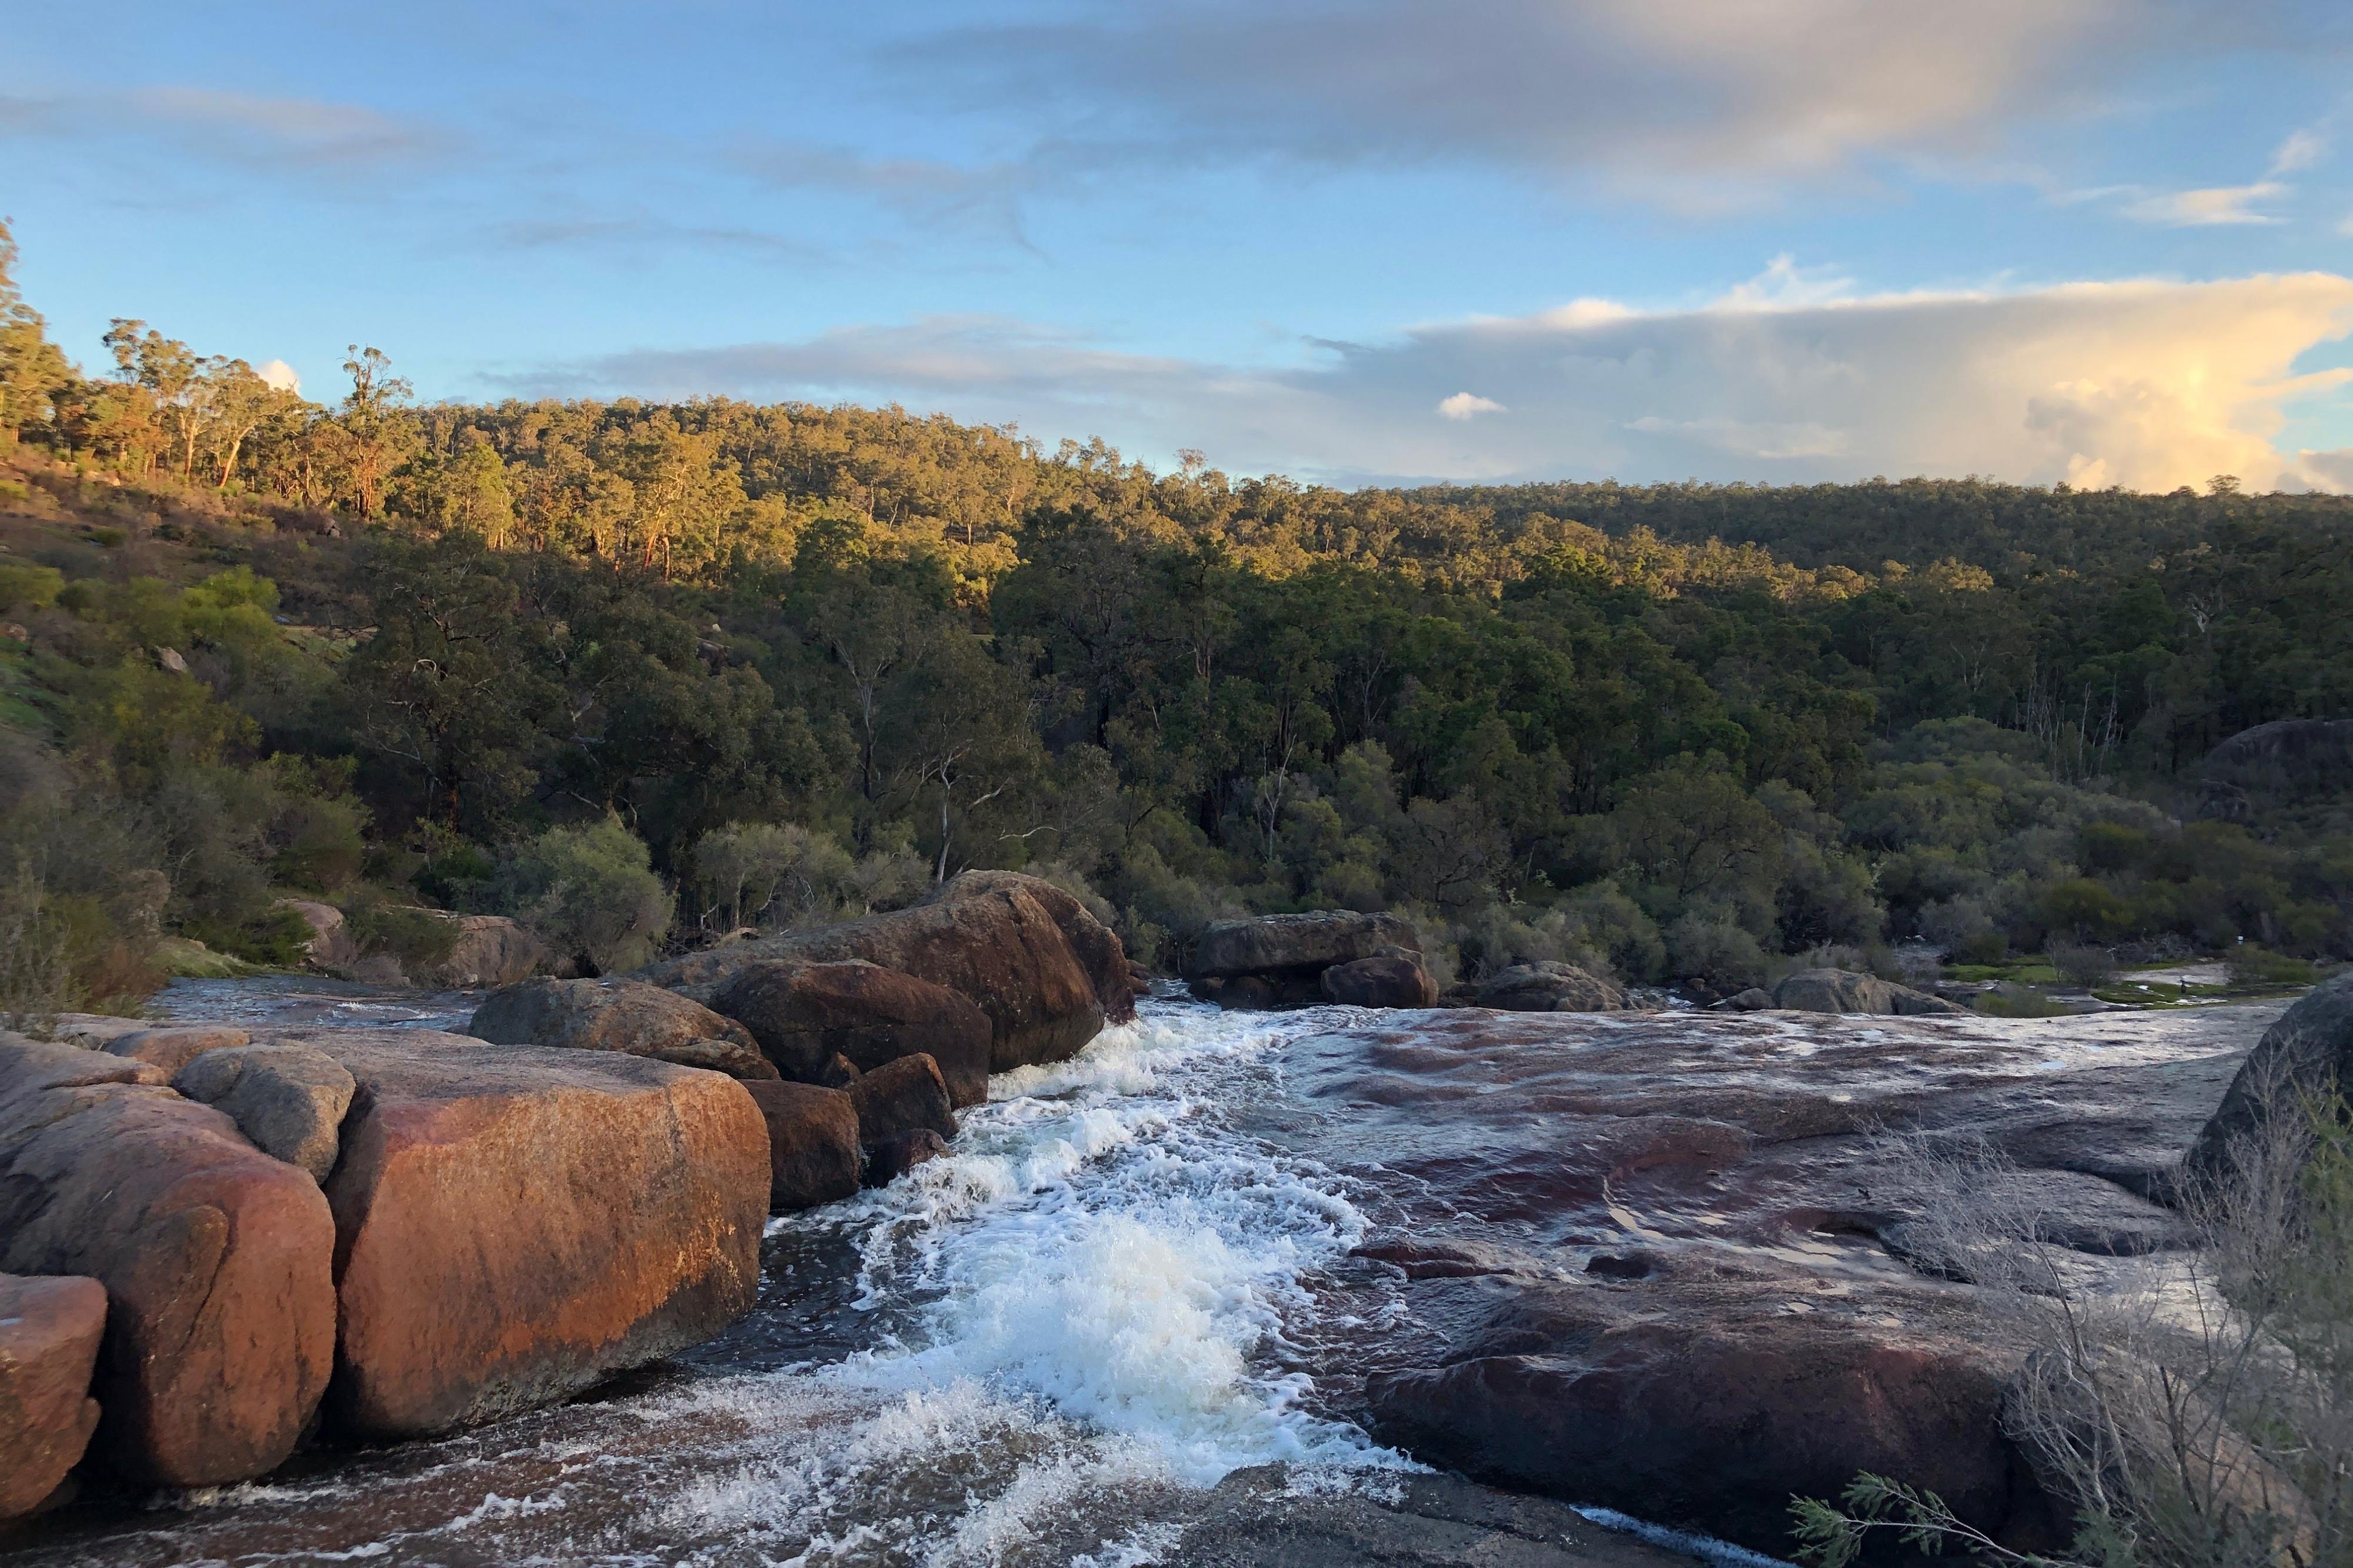 Hovea Falls with a view